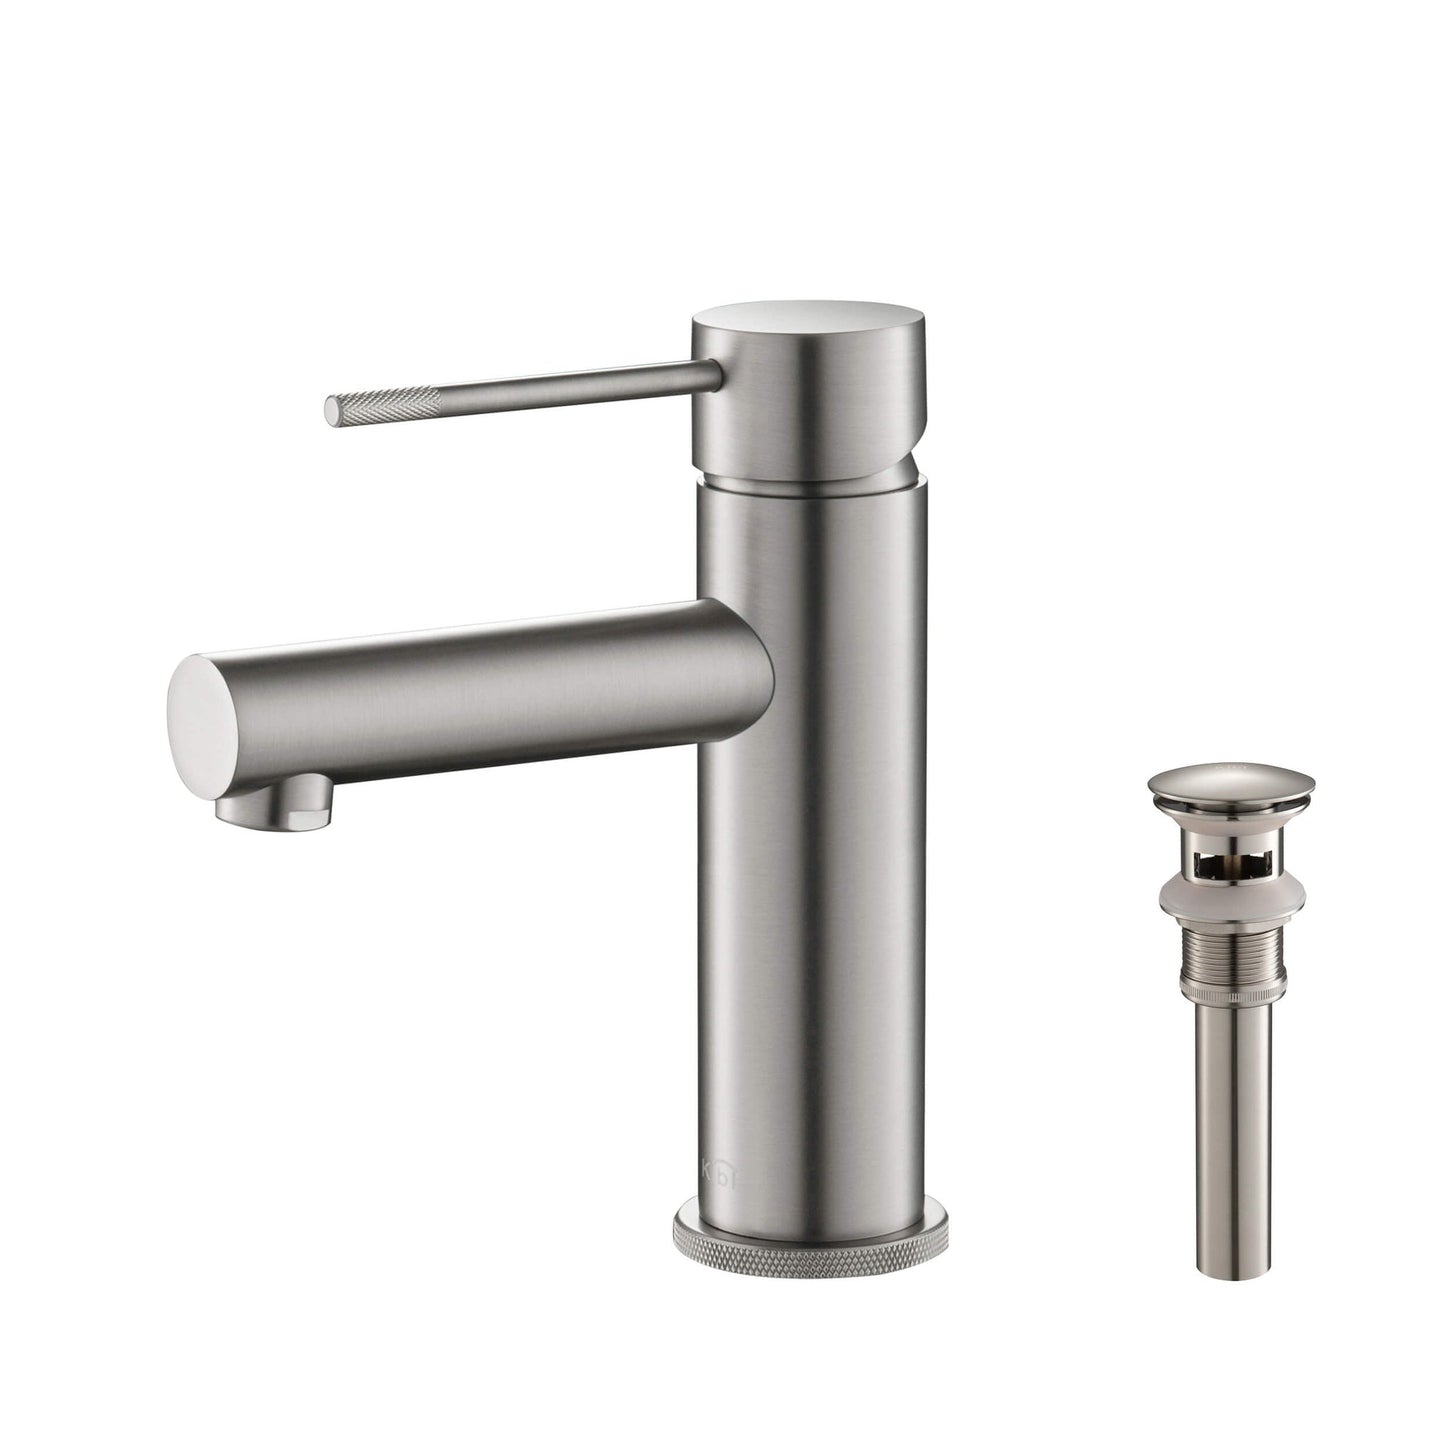 KIBI Circular X Single Handle Brushed Nickel Solid Brass Bathroom Sink Faucet With Pop-Up Drain Stopper With Overflow